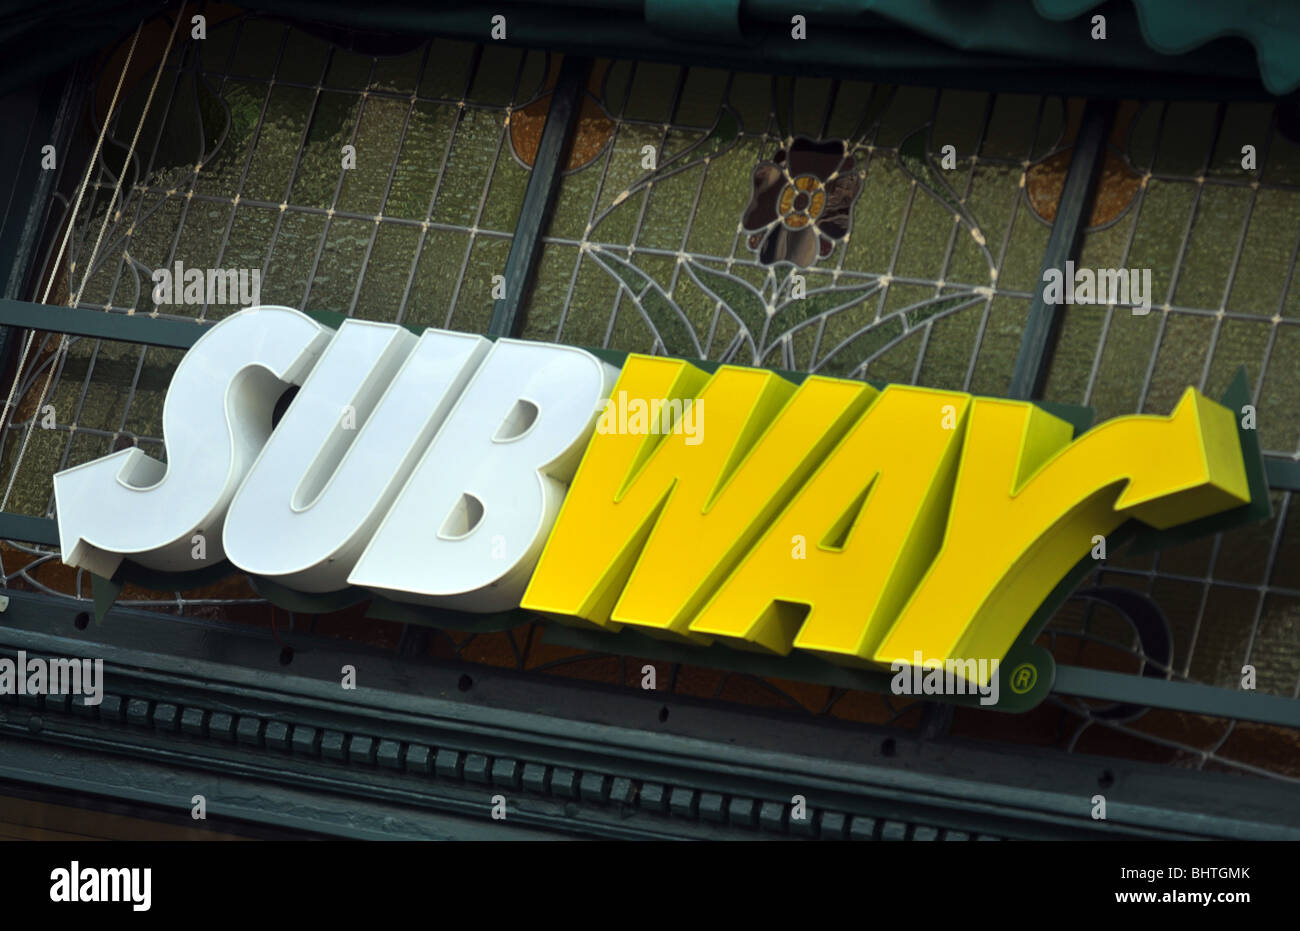 Magasin Subway sign Banque D'Images